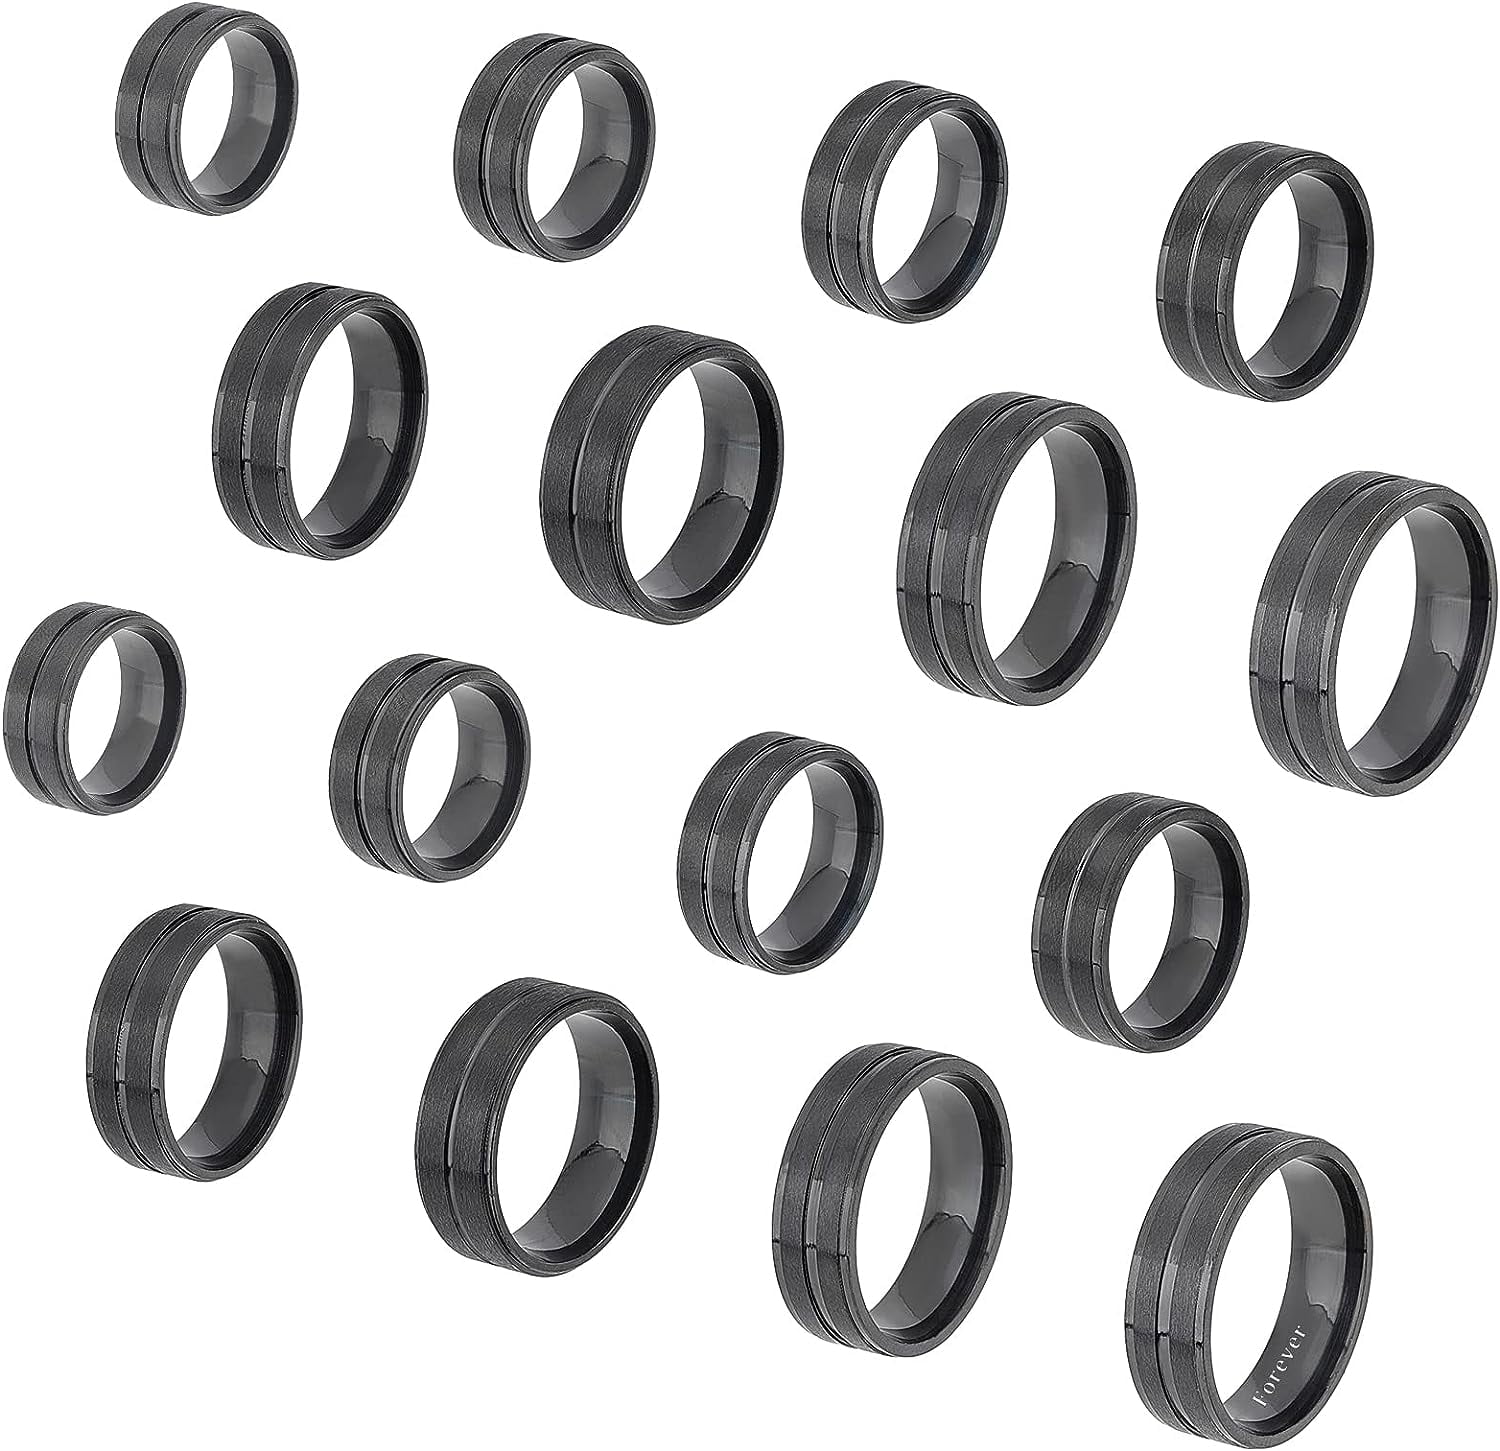 16pcs Black Stainless Steel Grooved Finger Ring 8 Sizes Blank Core Hypoallergenic Metal Inlay Jewelry Wedding Band Making Size 5 6 8 9 10 11 13 14 643d4447 019e 4c39 8c20 c97a1bfde2c3.24799a53e301ca0e6a4179ef044d18f6